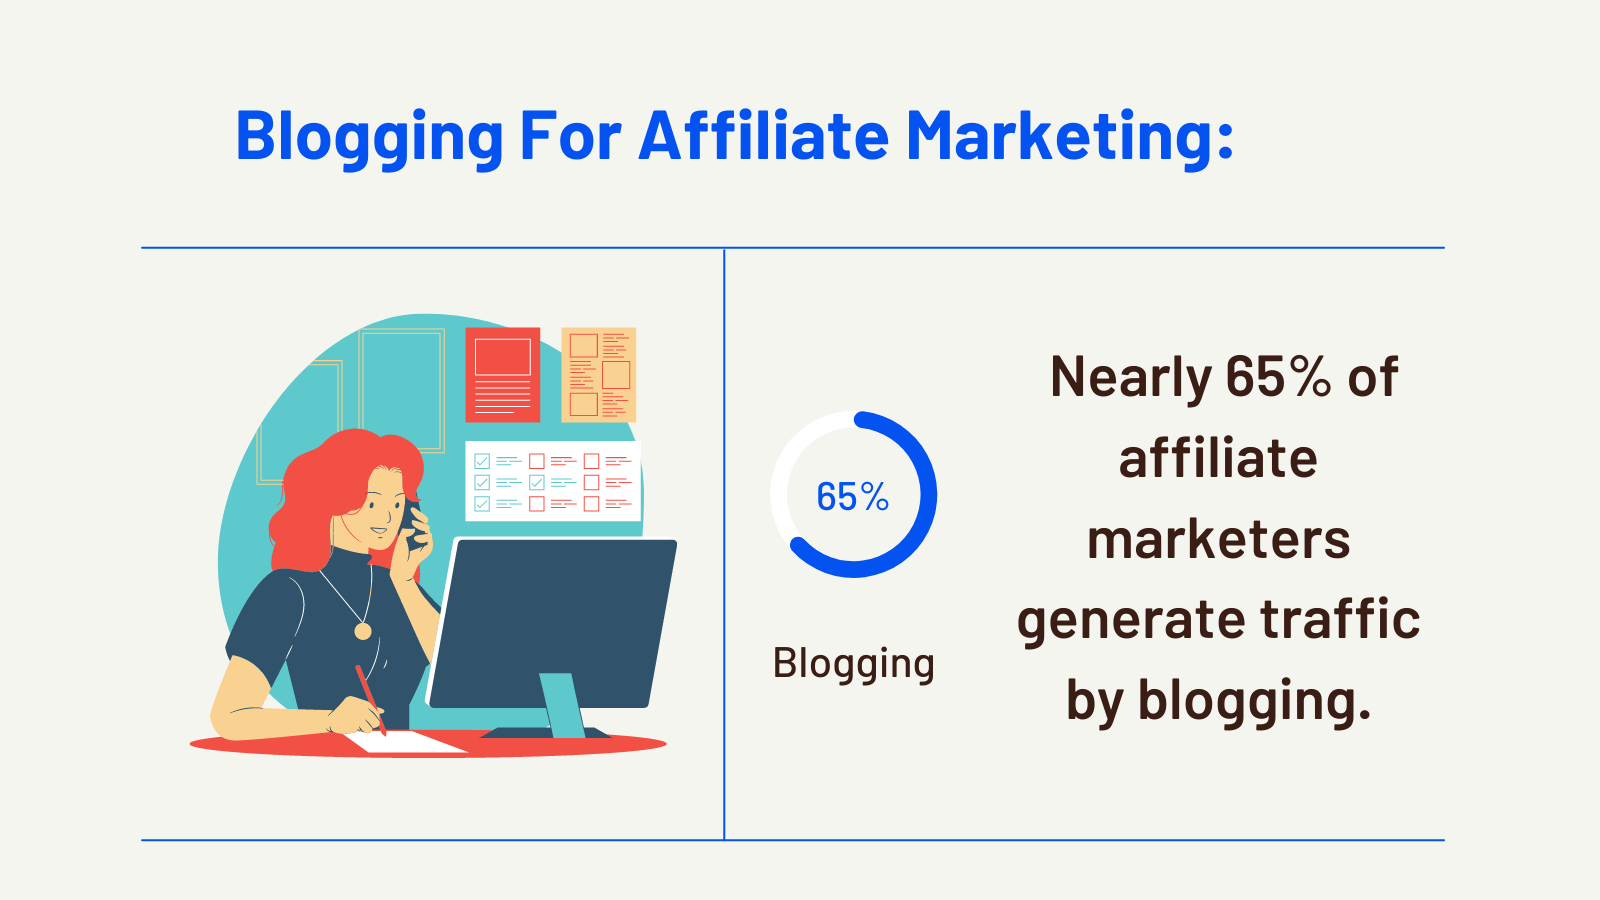 65% of affiliate marketers generate traffic with blogs